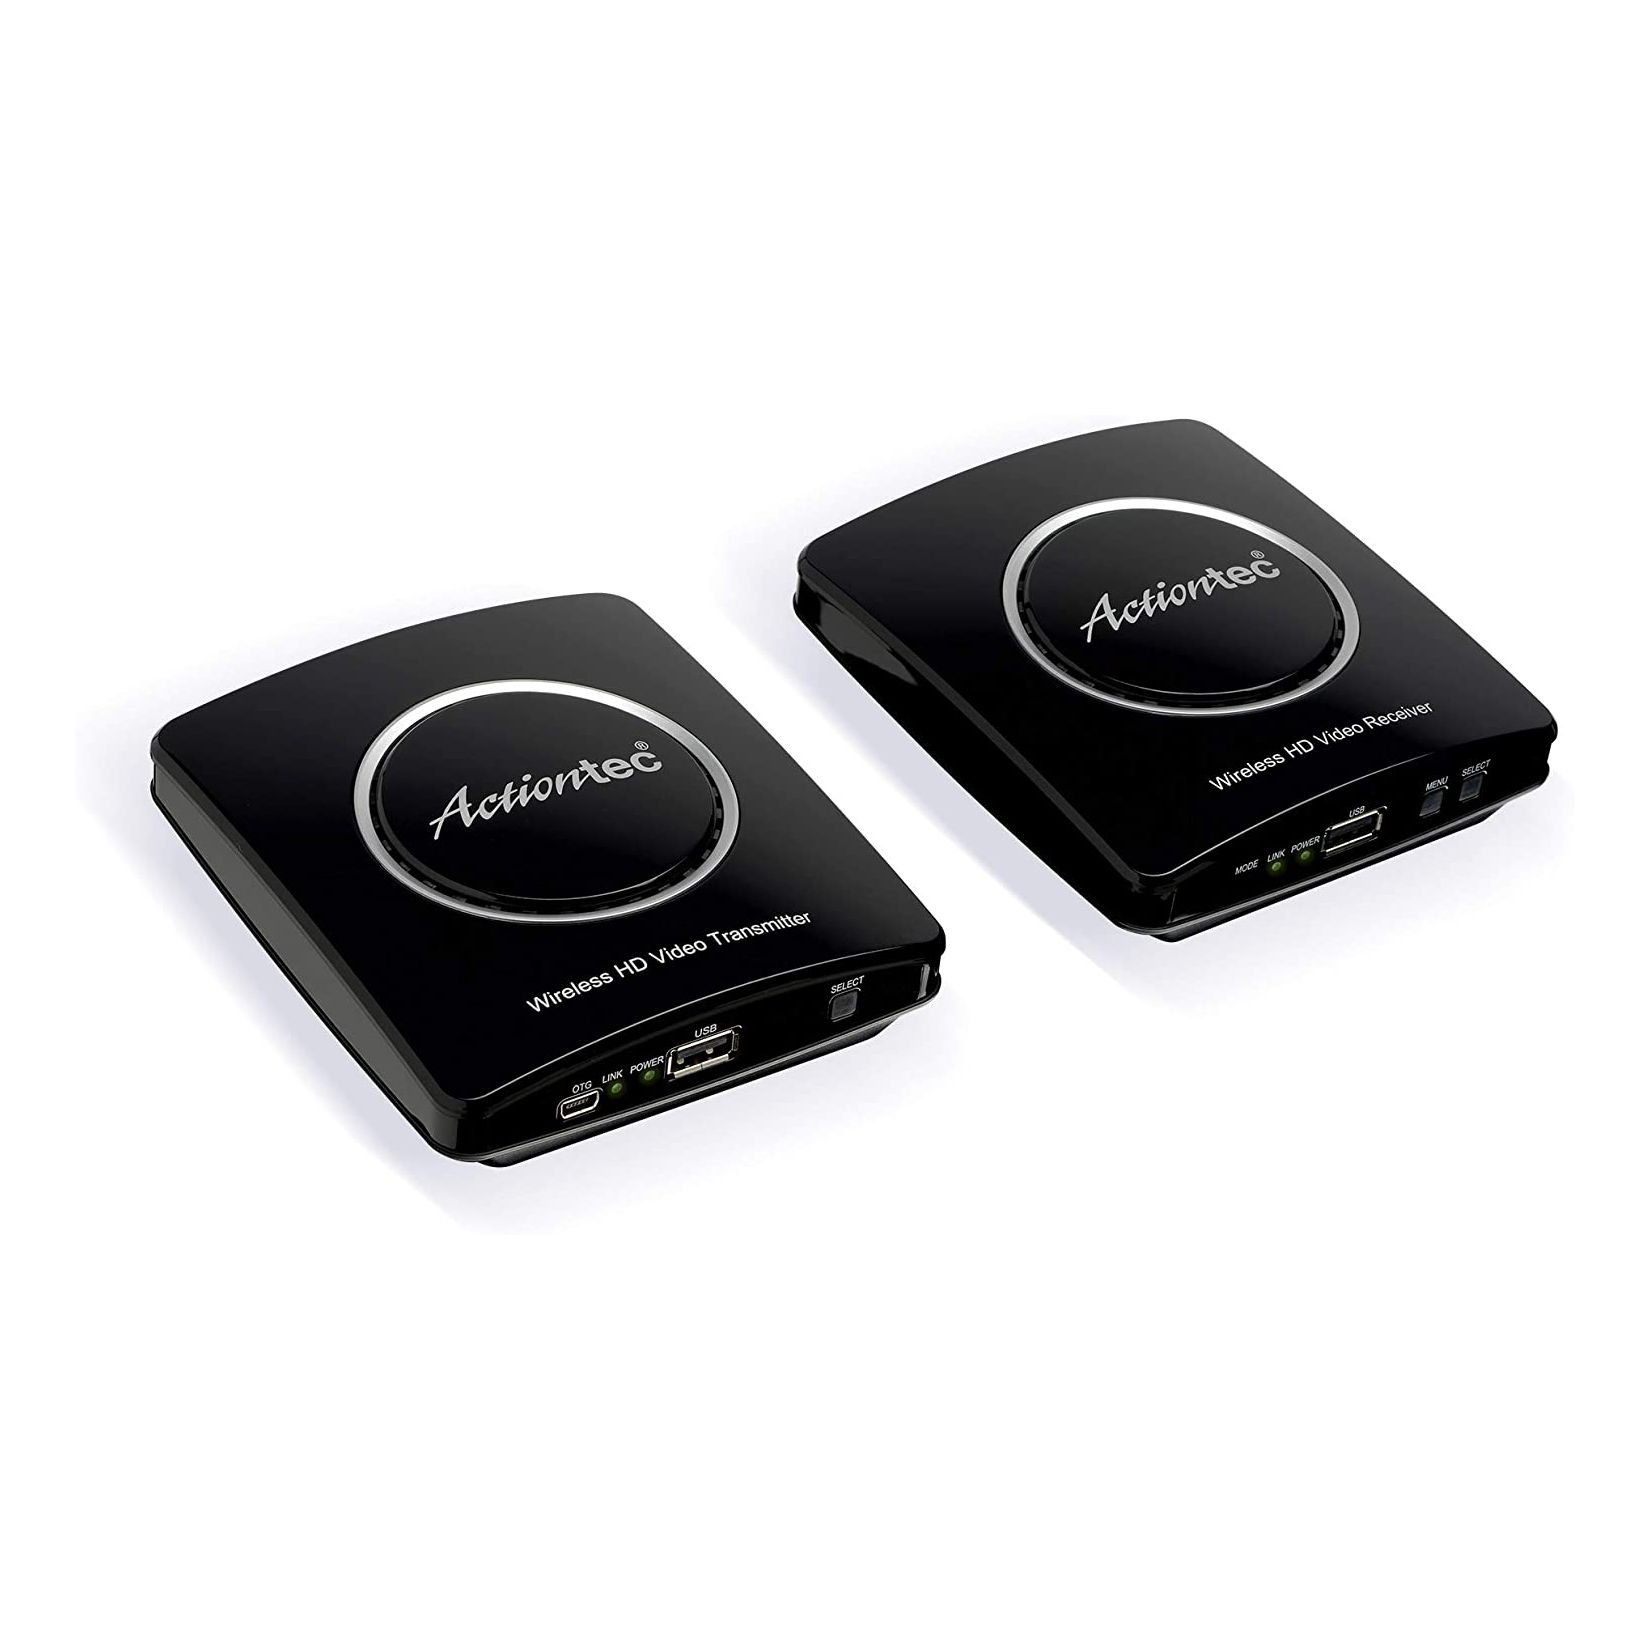 ScreenBeam Actiontec MyWirelessTV2 Wireless HDMI Transmitter and Receiver 01